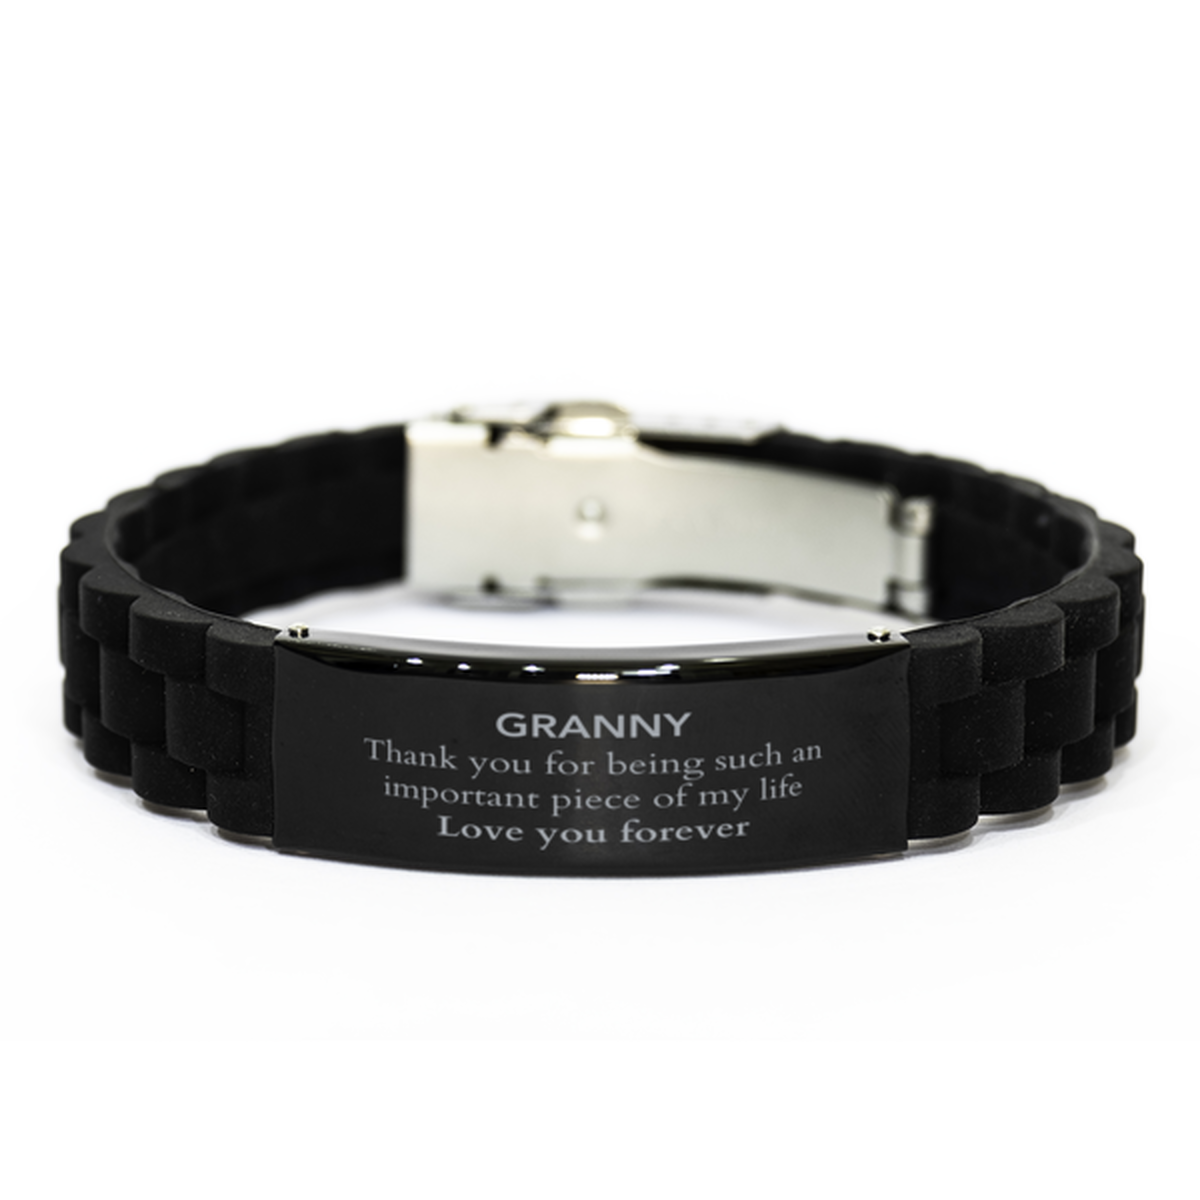 Appropriate Granny Black Glidelock Clasp Bracelet Epic Birthday Gifts for Granny Thank you for being such an important piece of my life Granny Christmas Mothers Fathers Day